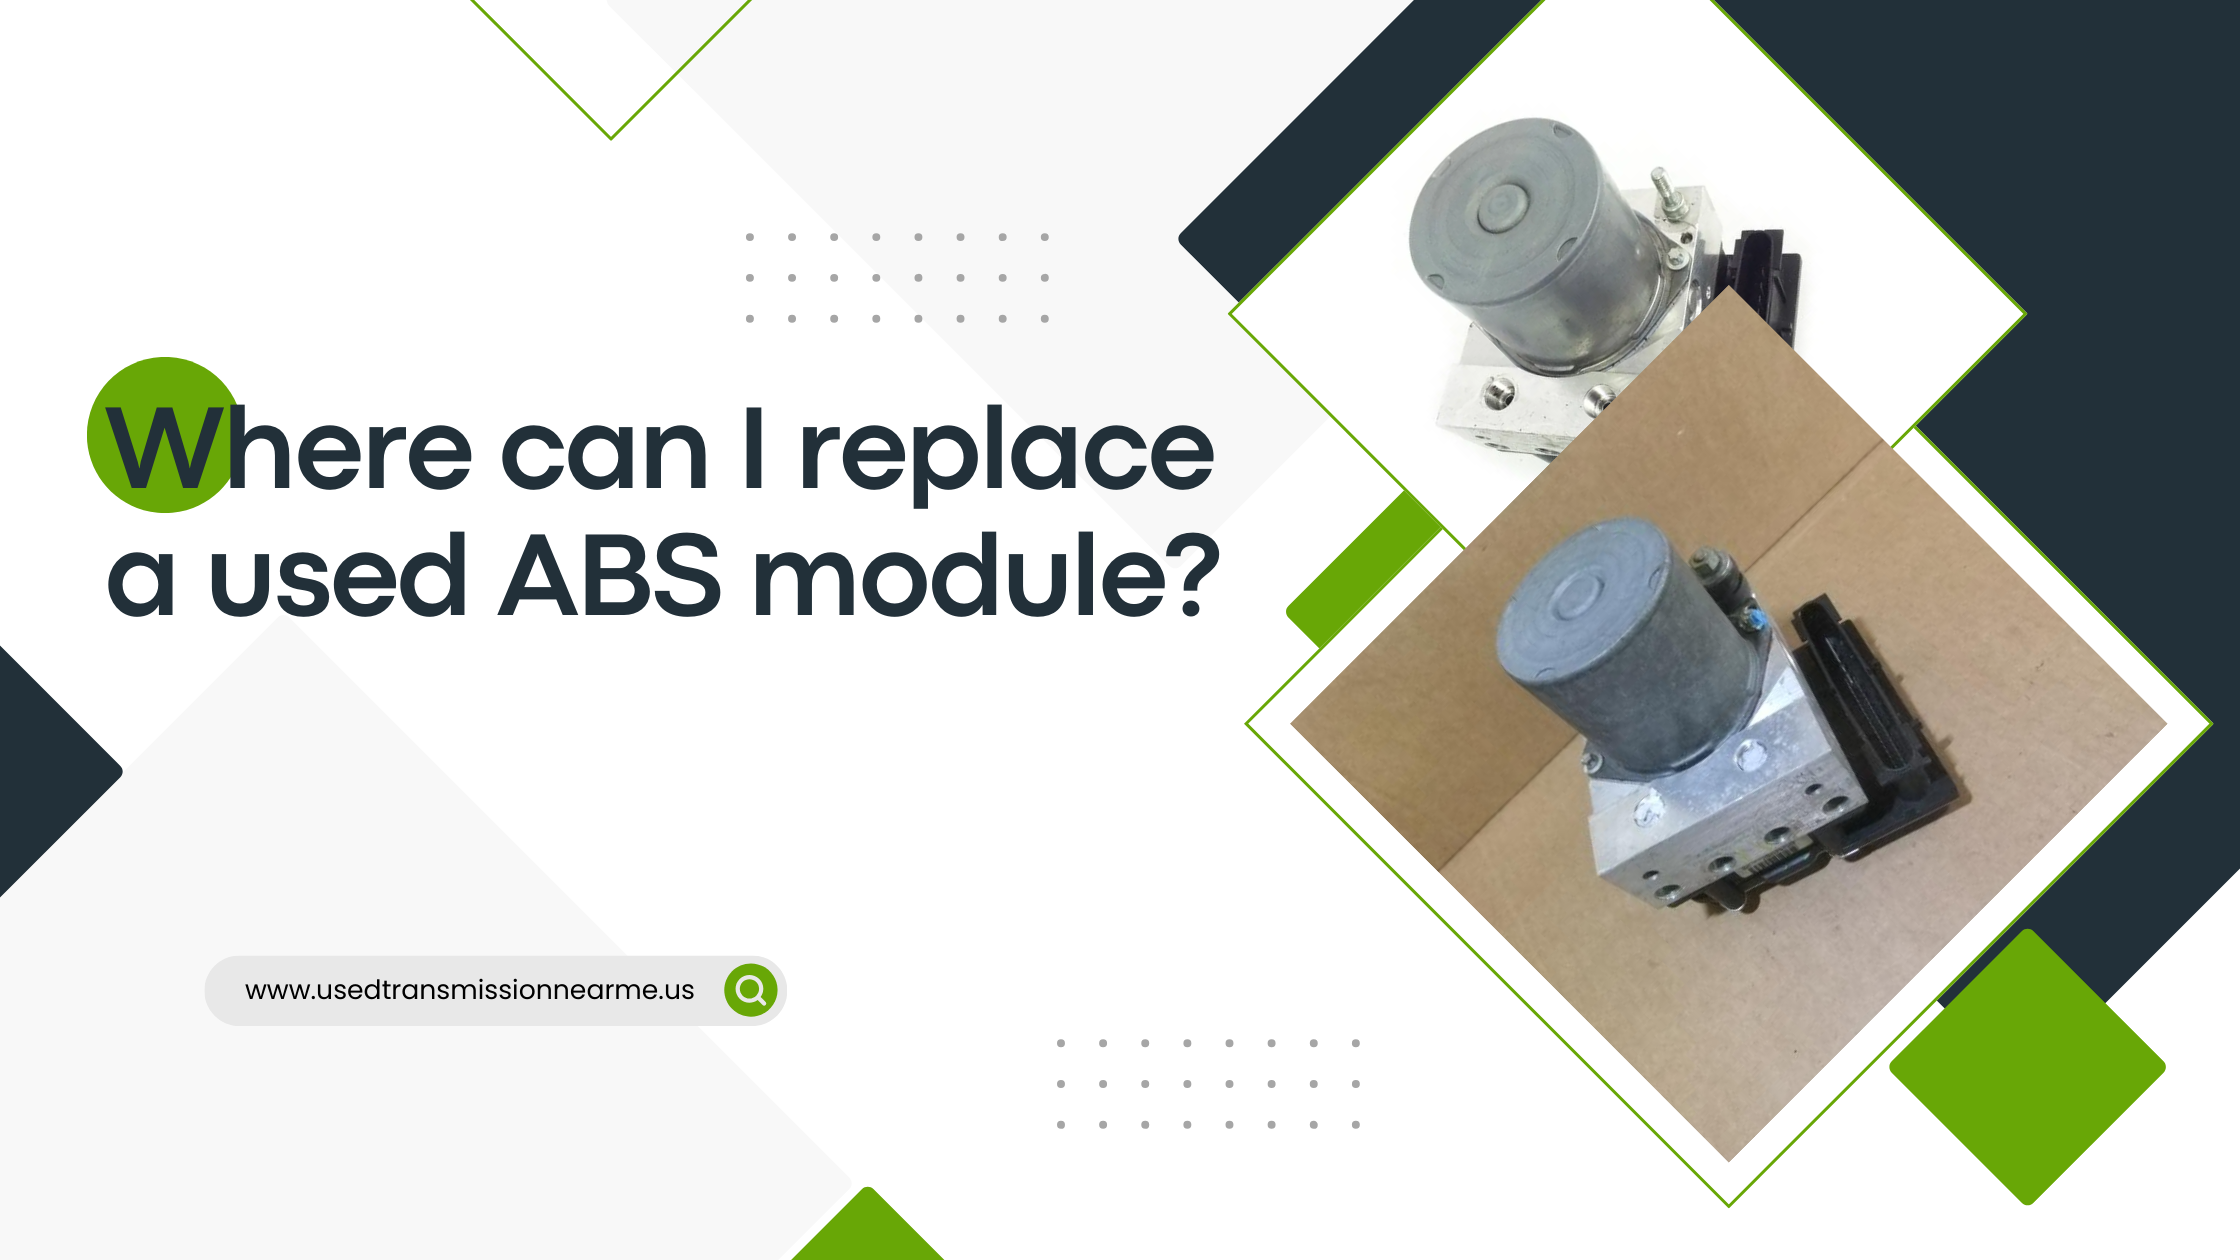 Where can I replace a used ABS module